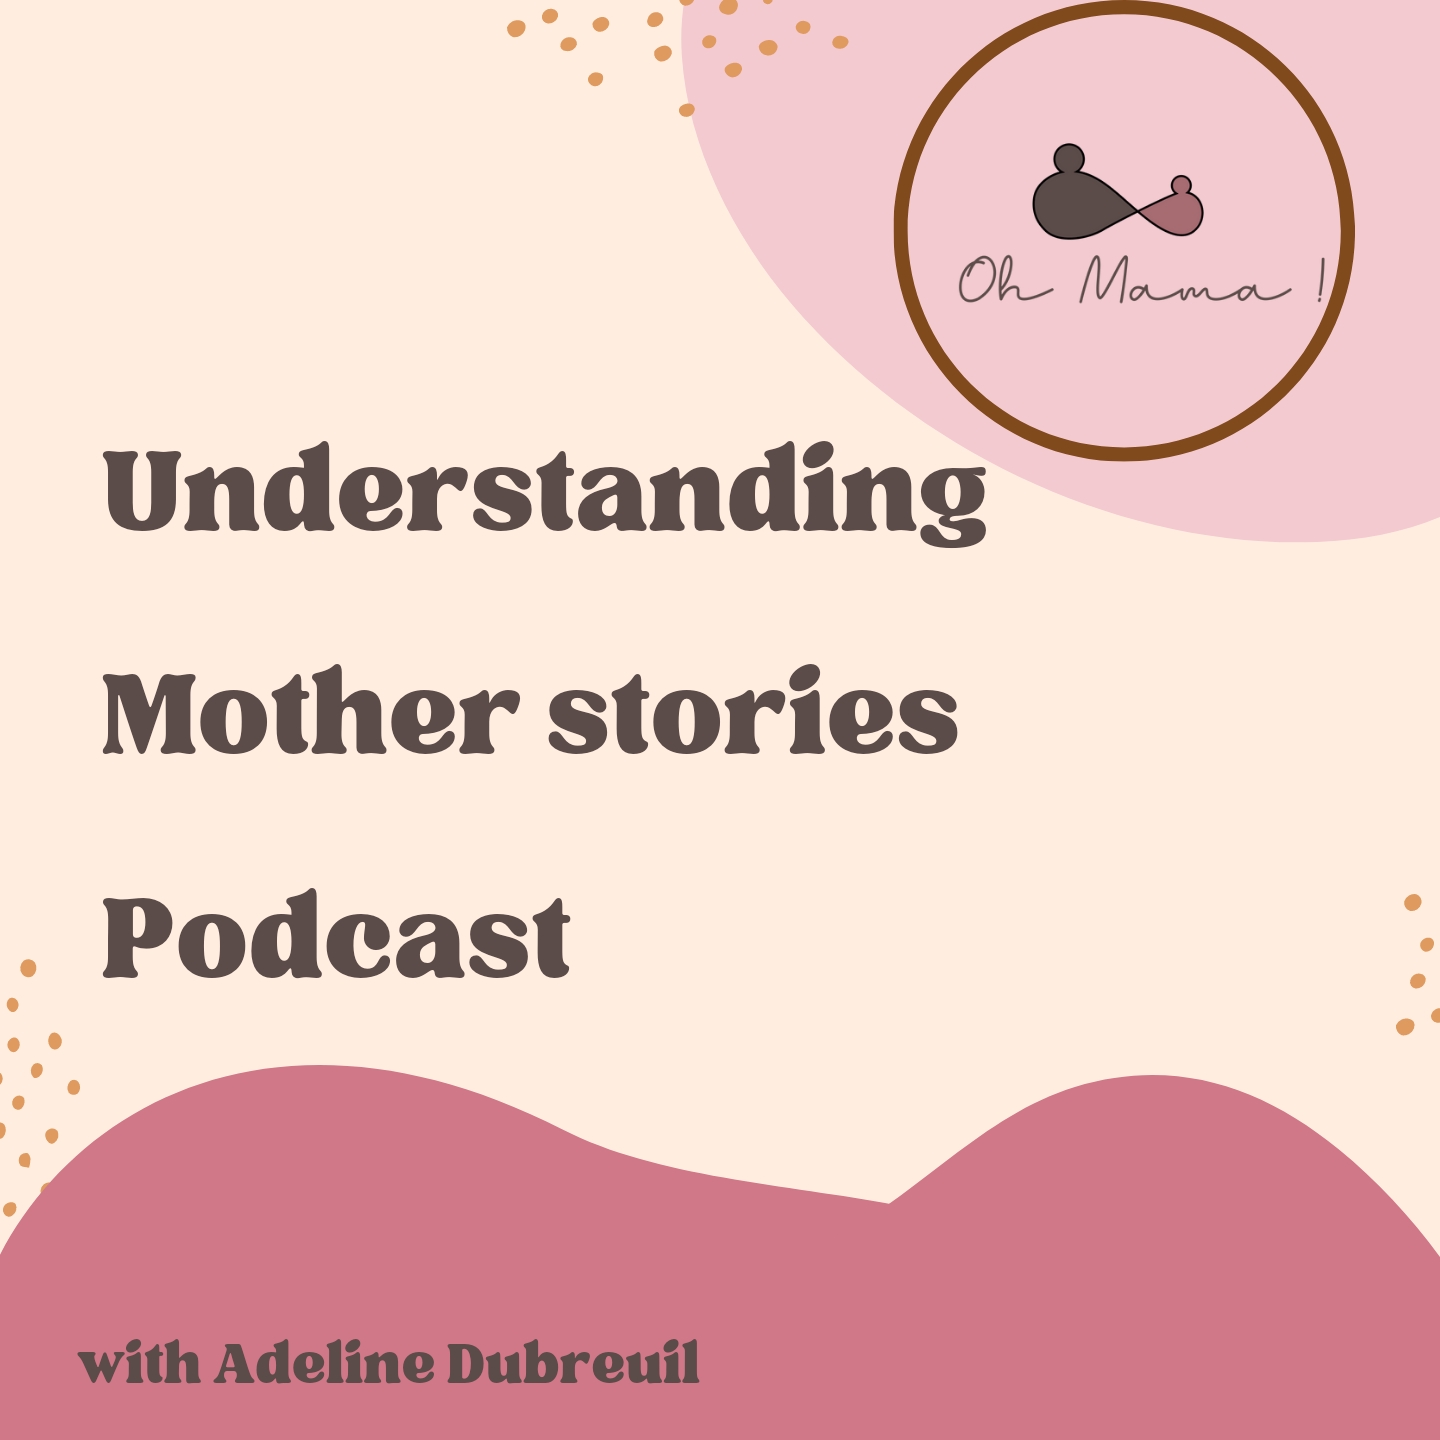 Understand Mothers' Stories Podcast